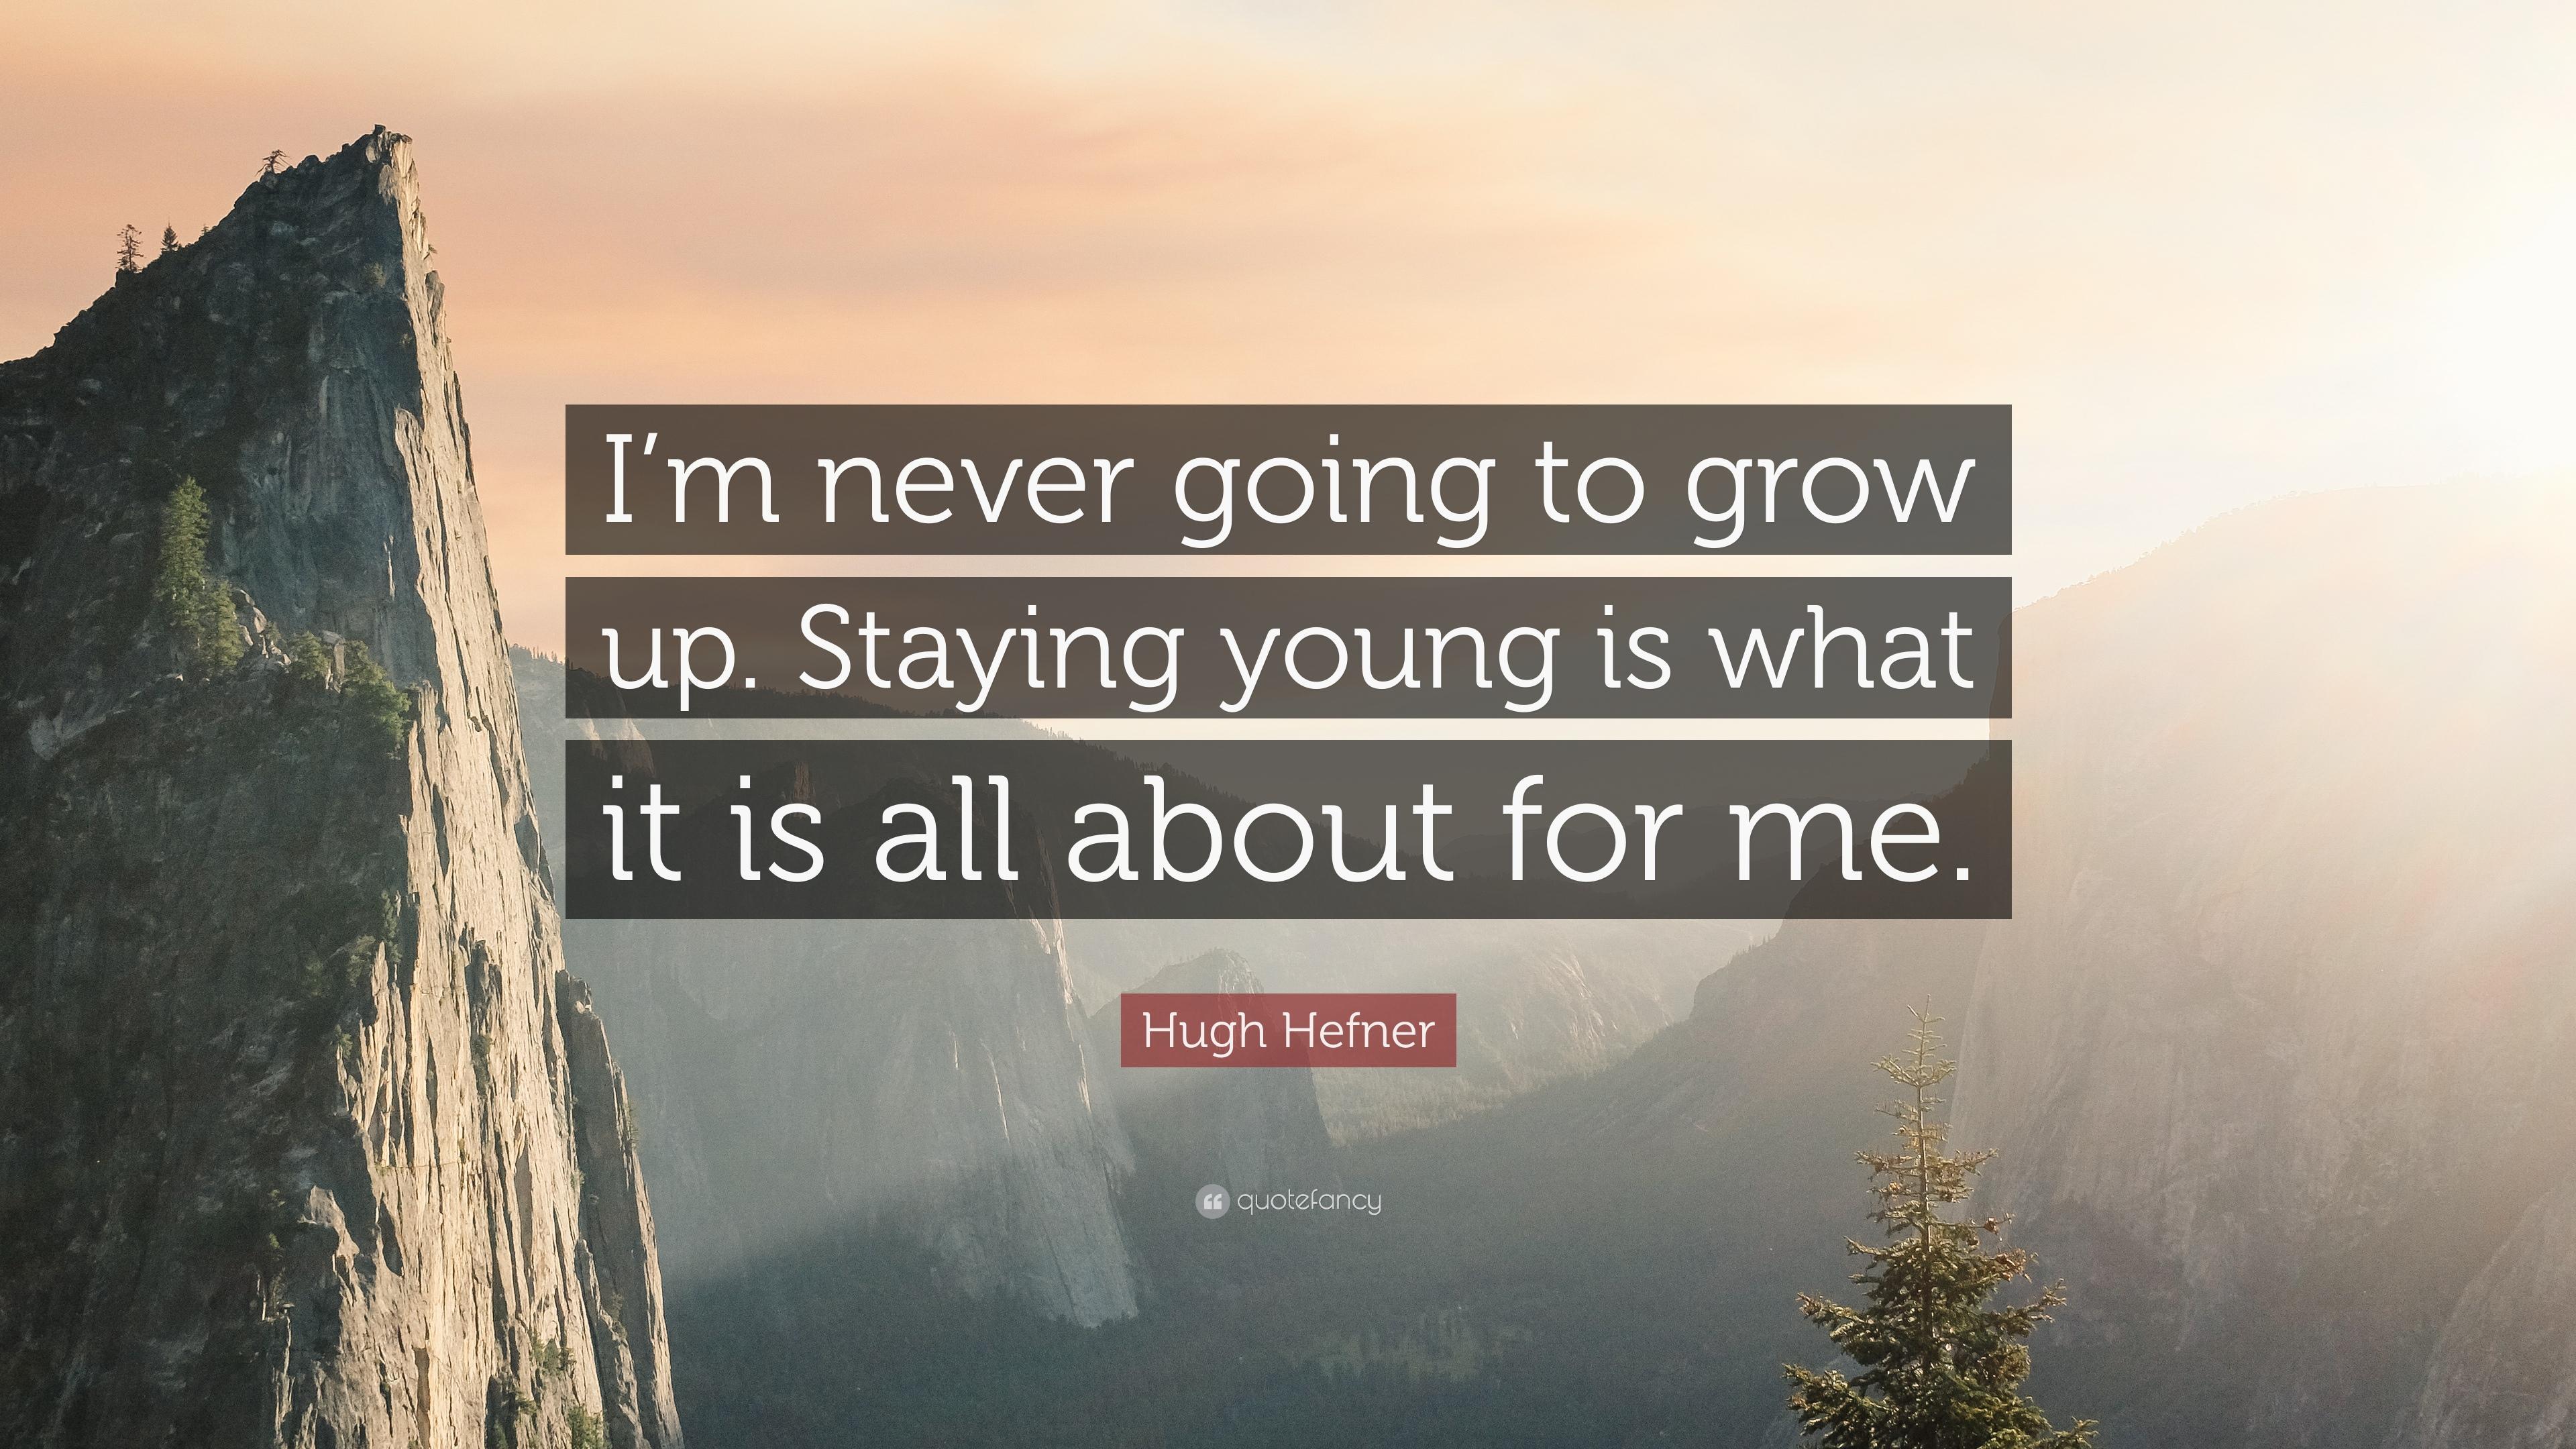 Hugh Hefner Quote: “I'm never going to grow up. Staying young is